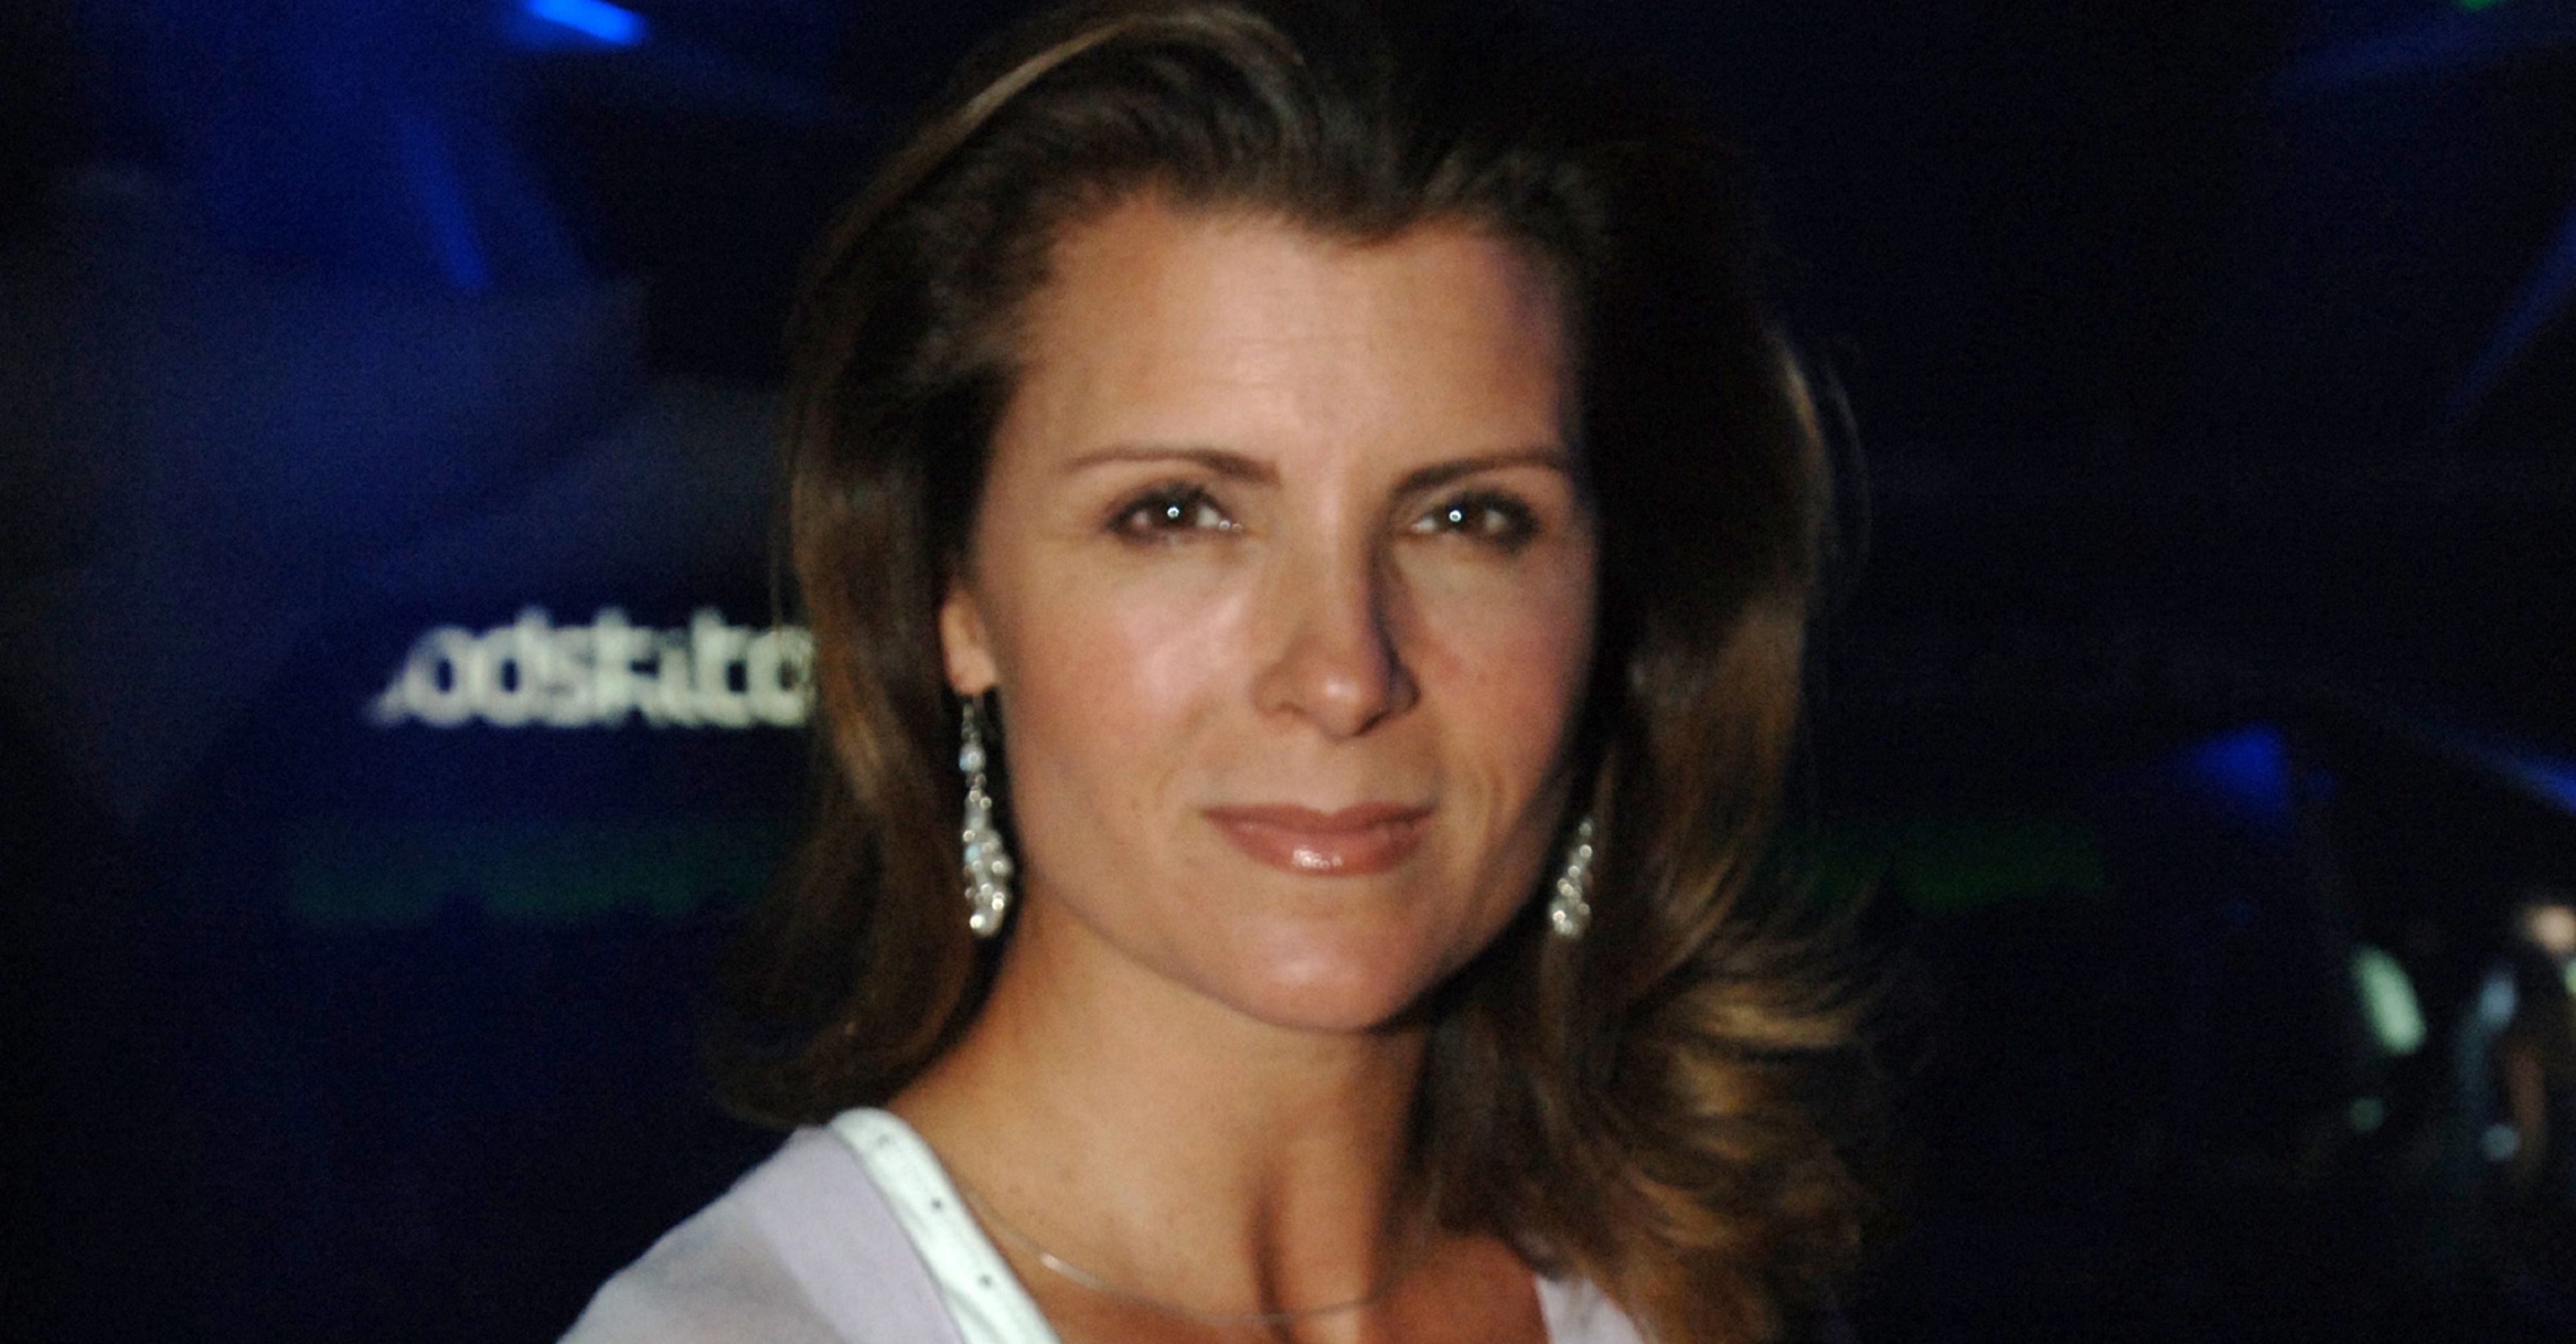 The Bold and the Beautiful star Kimberlin Brown in a white shirt